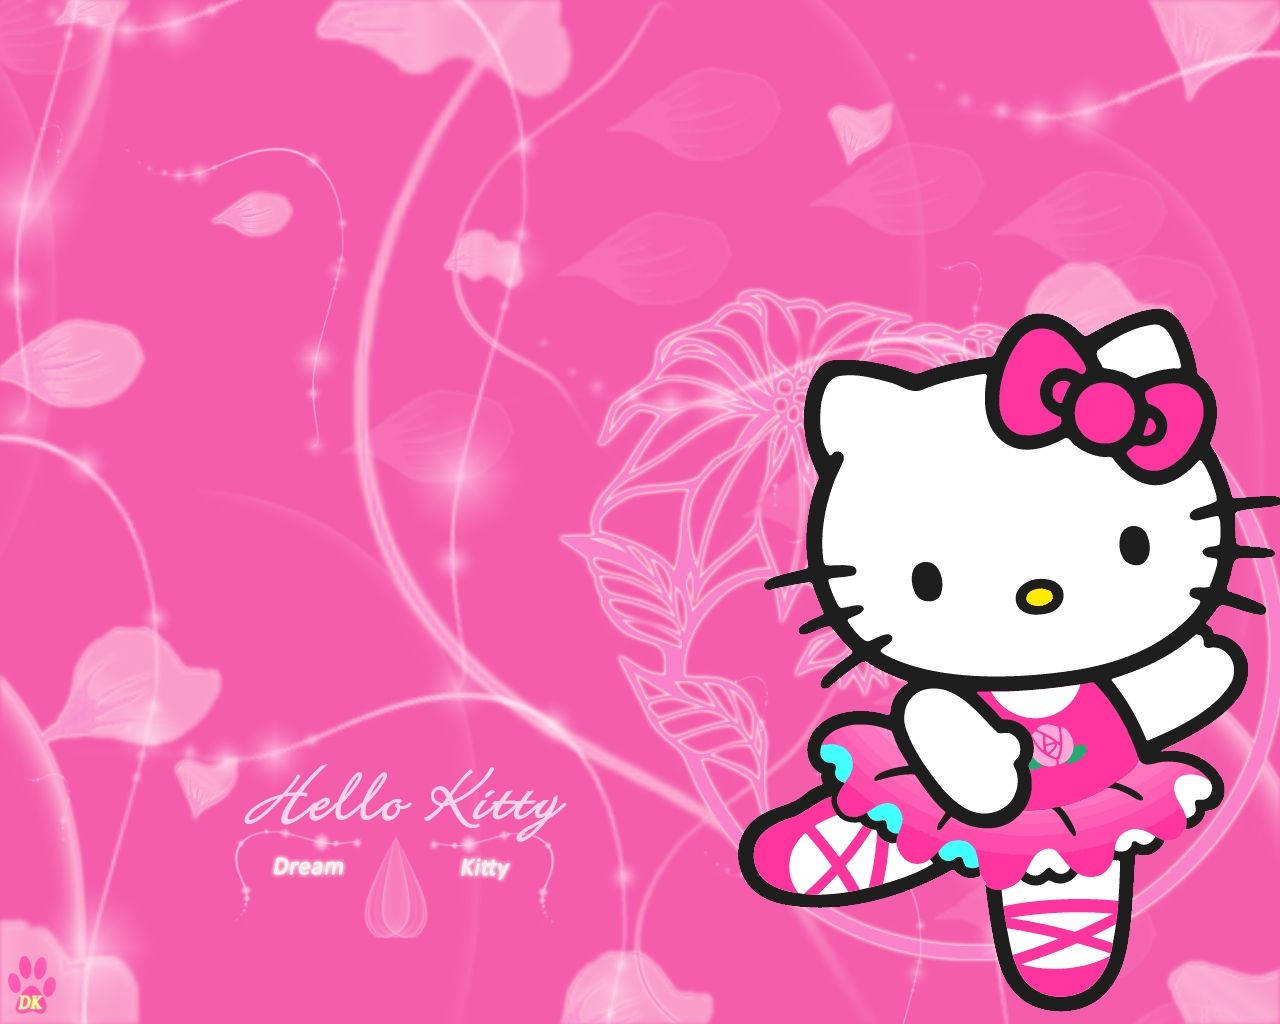 Look At This Graceful Ballerina, Dressed Up In Her Pink Hello Kitty Dress! Wallpaper